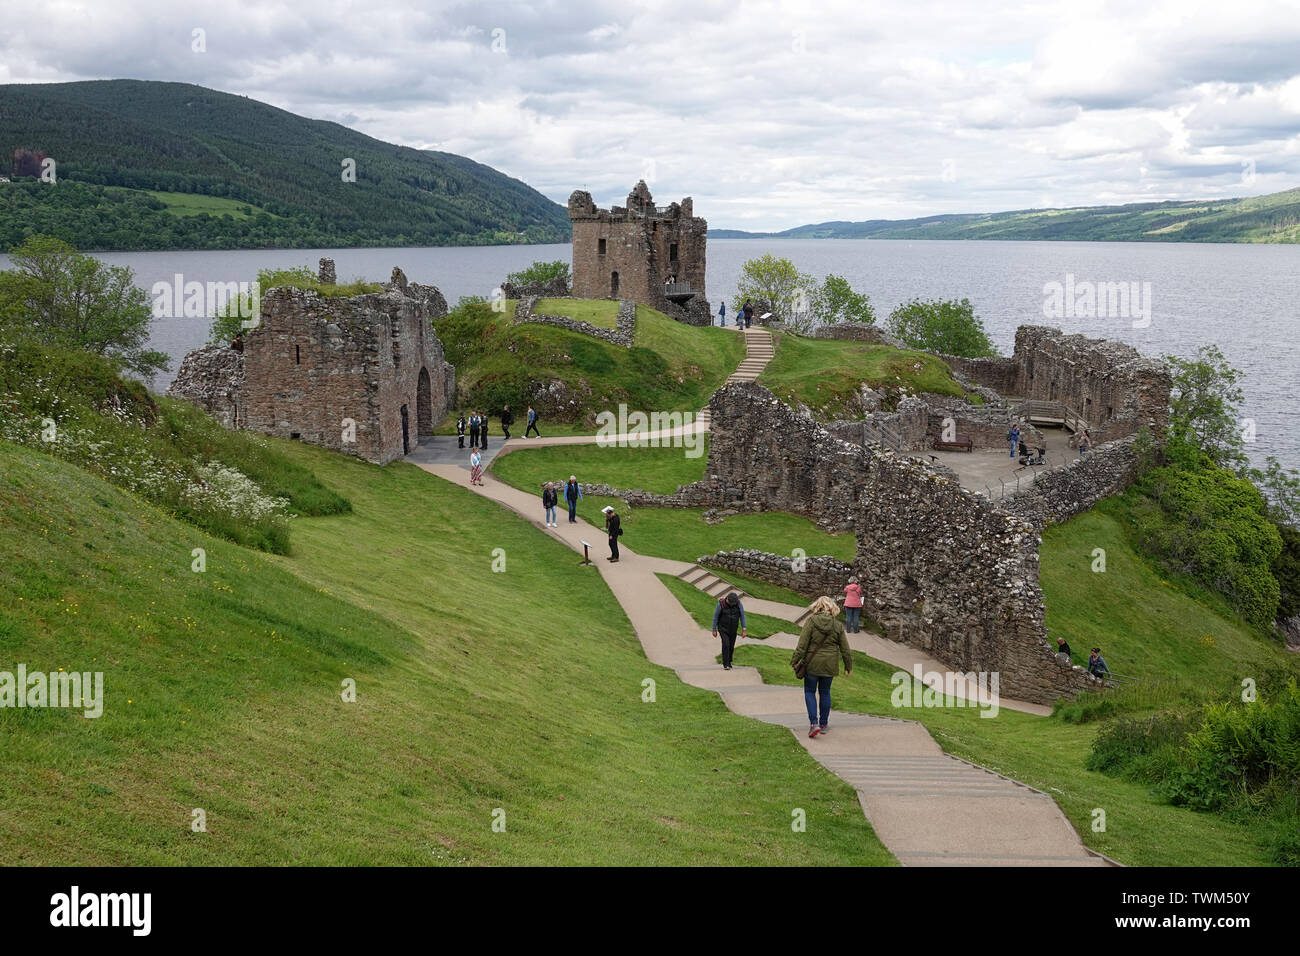 Drumnadrochit, Inverness, Scotland - June 10, 2019: Urquhart Castle ruins are shown next next to Loch Ness during an afternoon day. Stock Photo